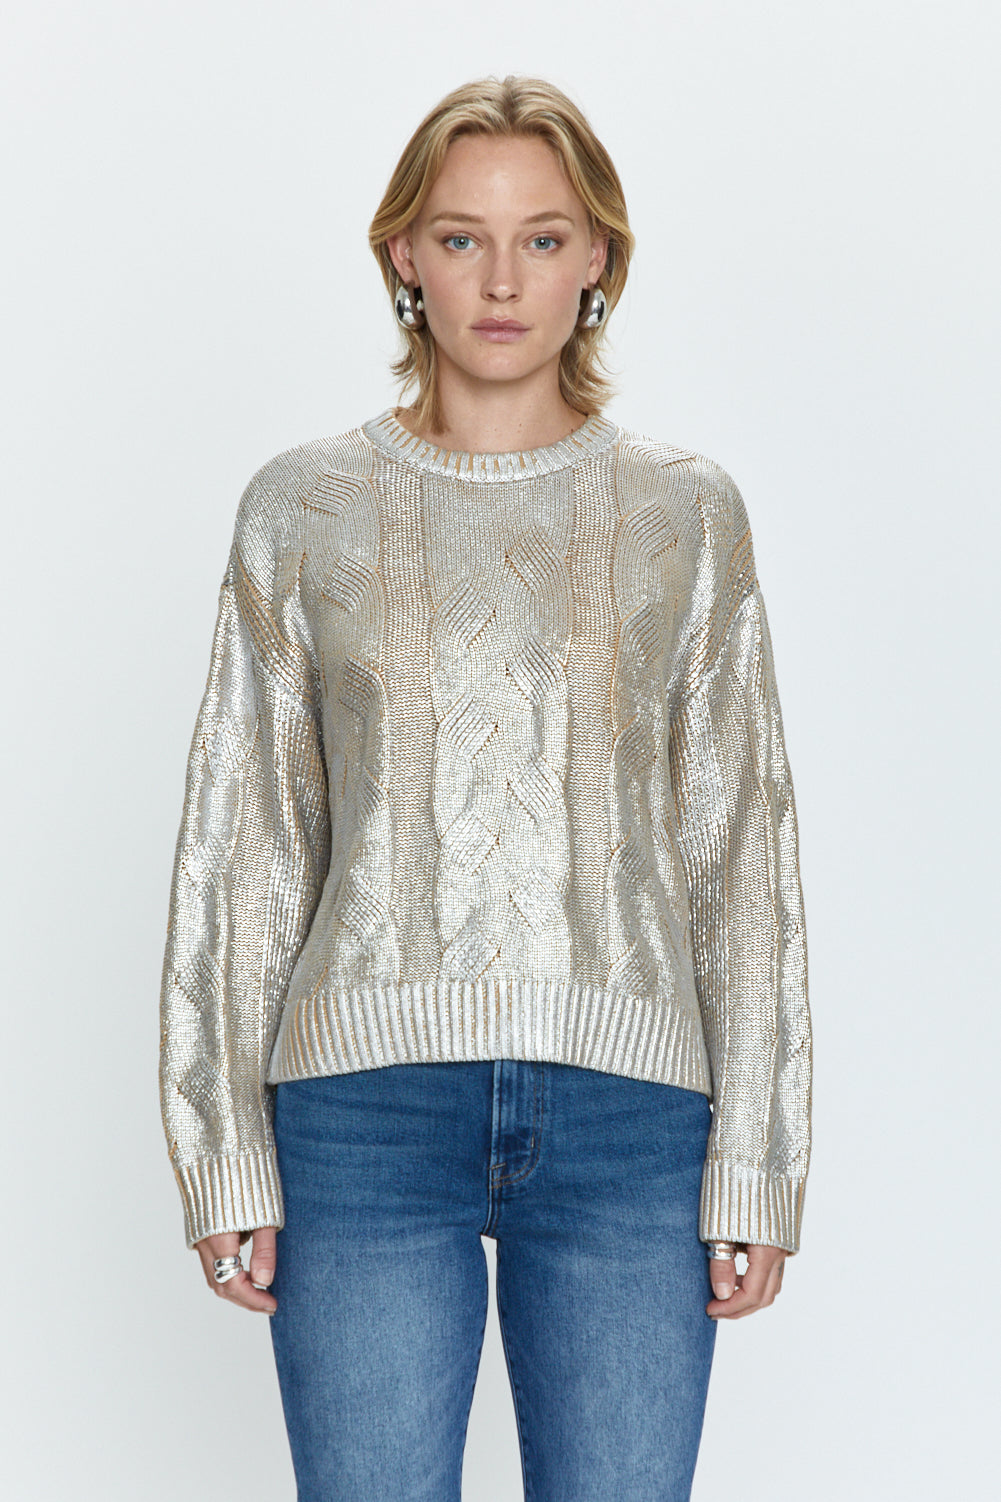 Everly Cable Sweater - Gilded Castle
            
              Sale